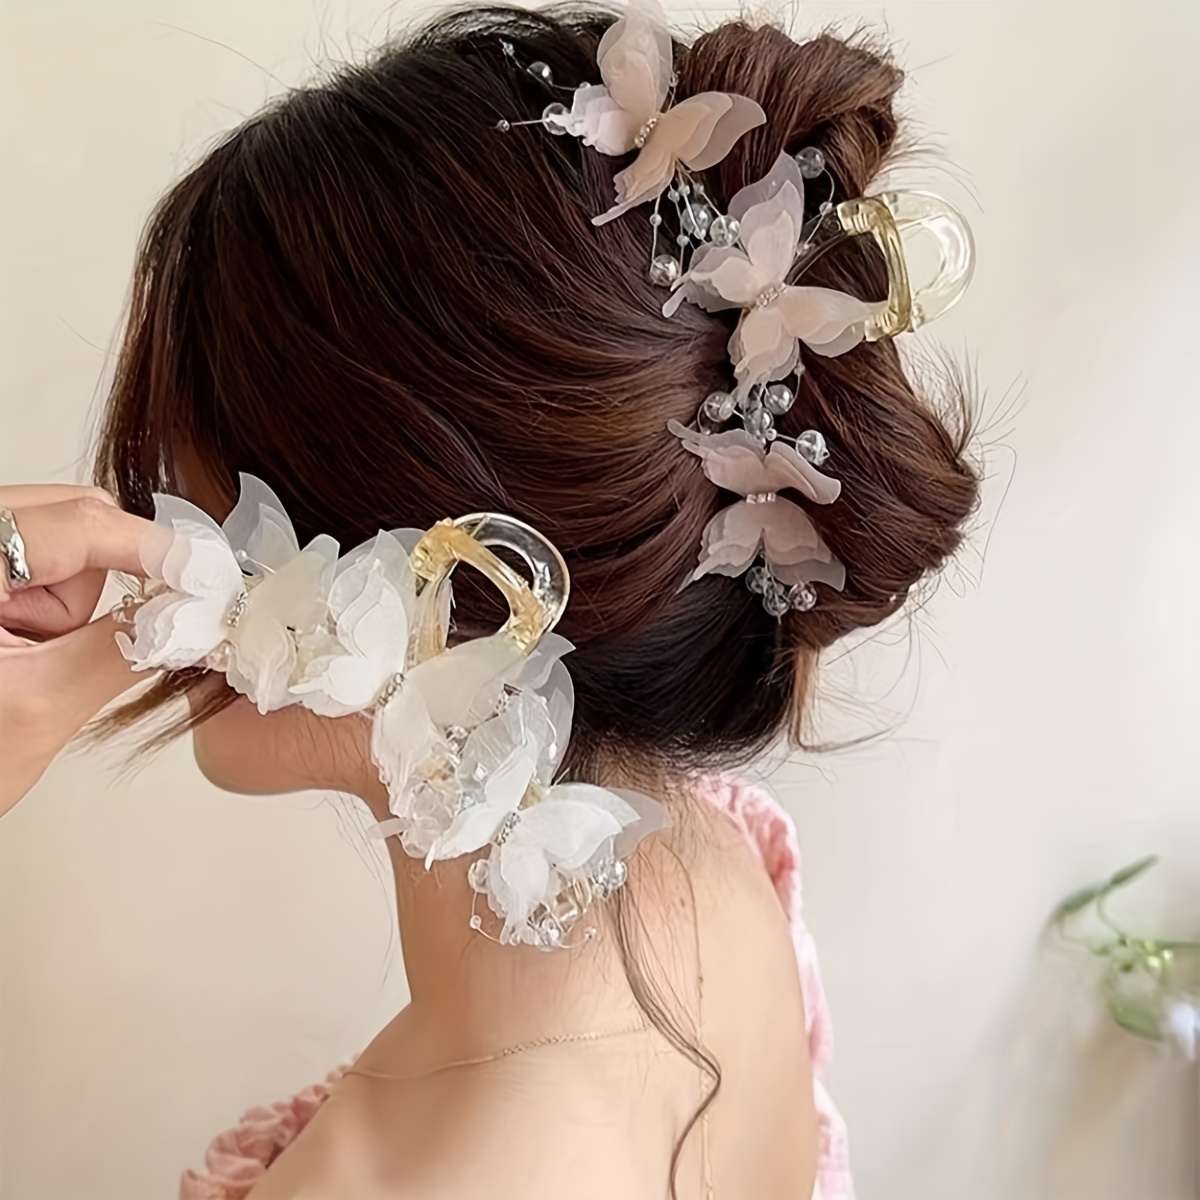 

Elegant Butterfly Hair Claw Clip - Large, Non-slip, Strong Grip For Thick & Curly Hair - Chic Accessory For Women And Girls Butterfly Hair Clips Hair Claw Clips For Women